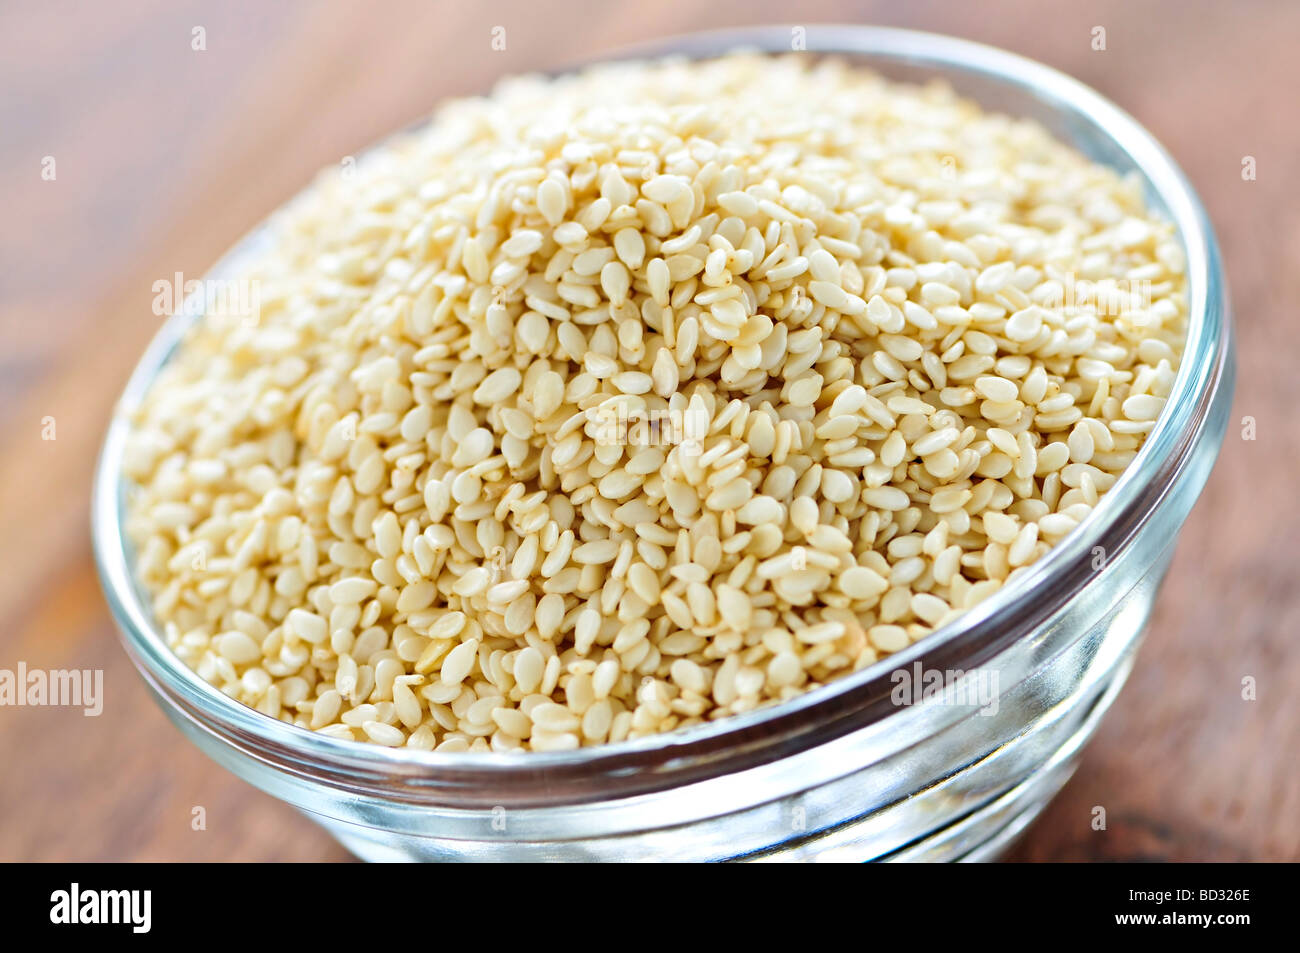 Sesame seeds close up in glass bowl Stock Photo